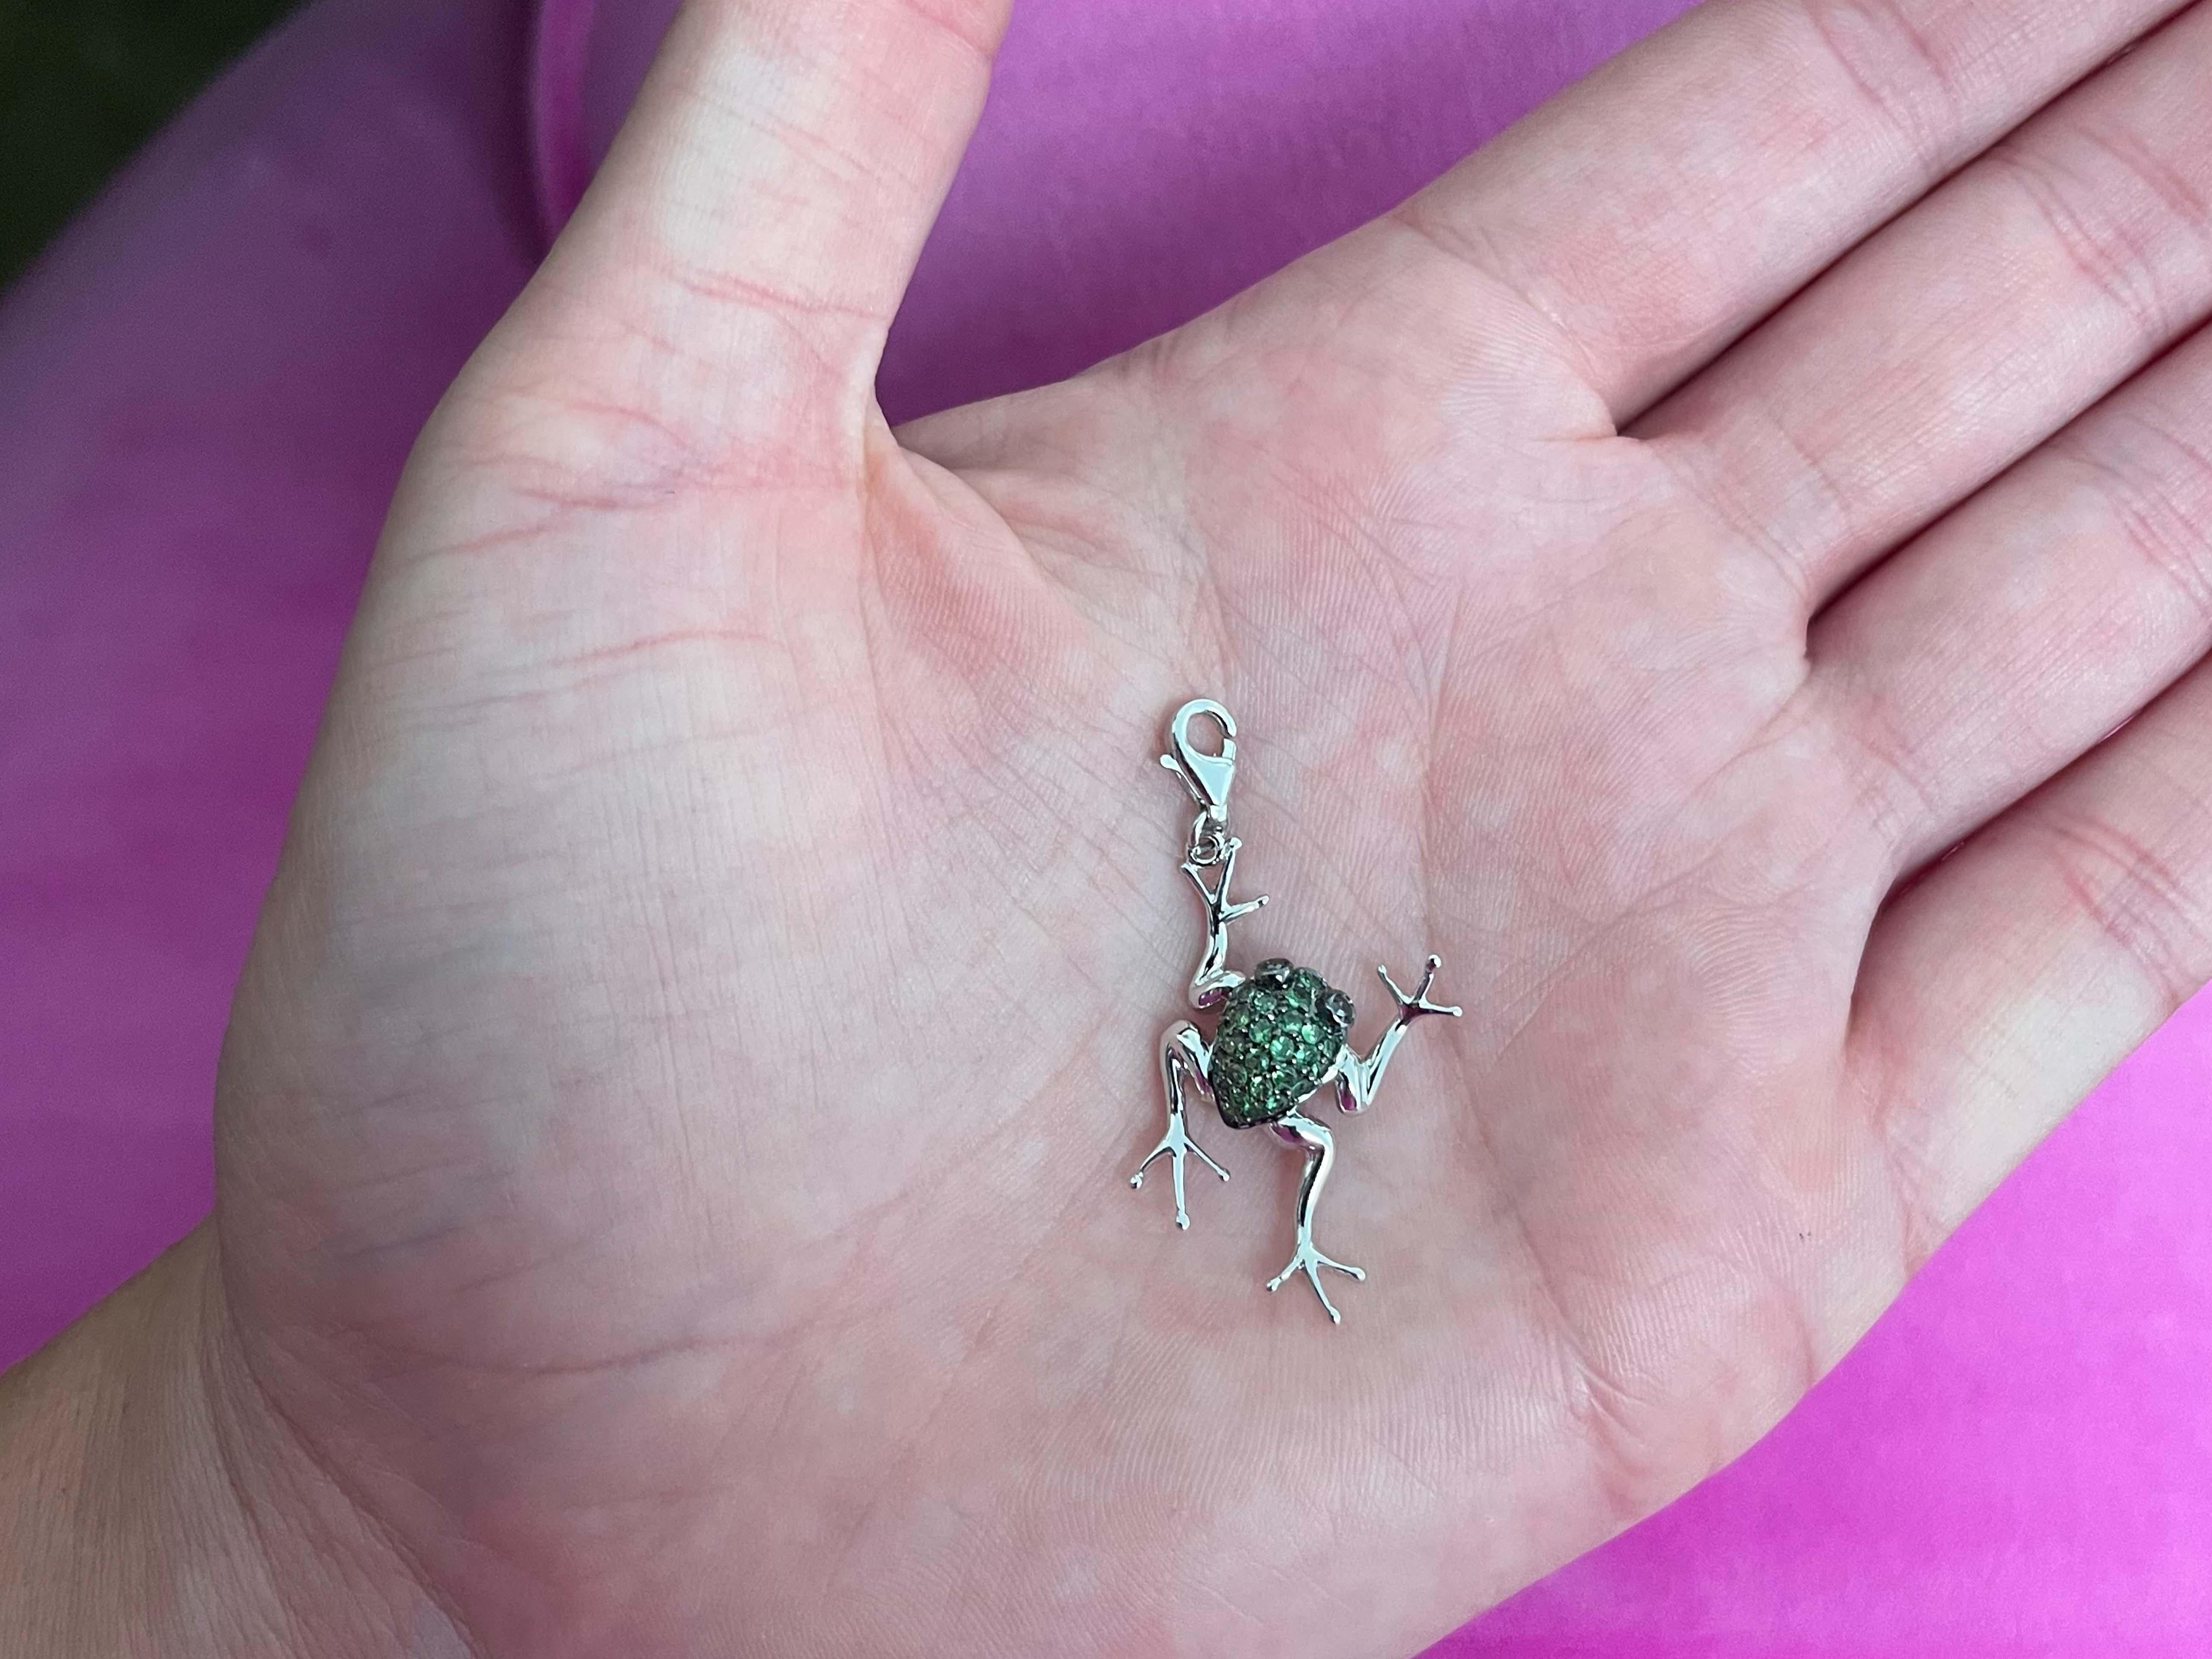 Green Tsavorite & Black Diamond Frog Pendant Charm in 14K White Gold. The body is made with green tsavorite and the eyes are made with black diamonds. The body of the frog is black rhodeum plated. This pendant charm is beautifully crafted in 14k